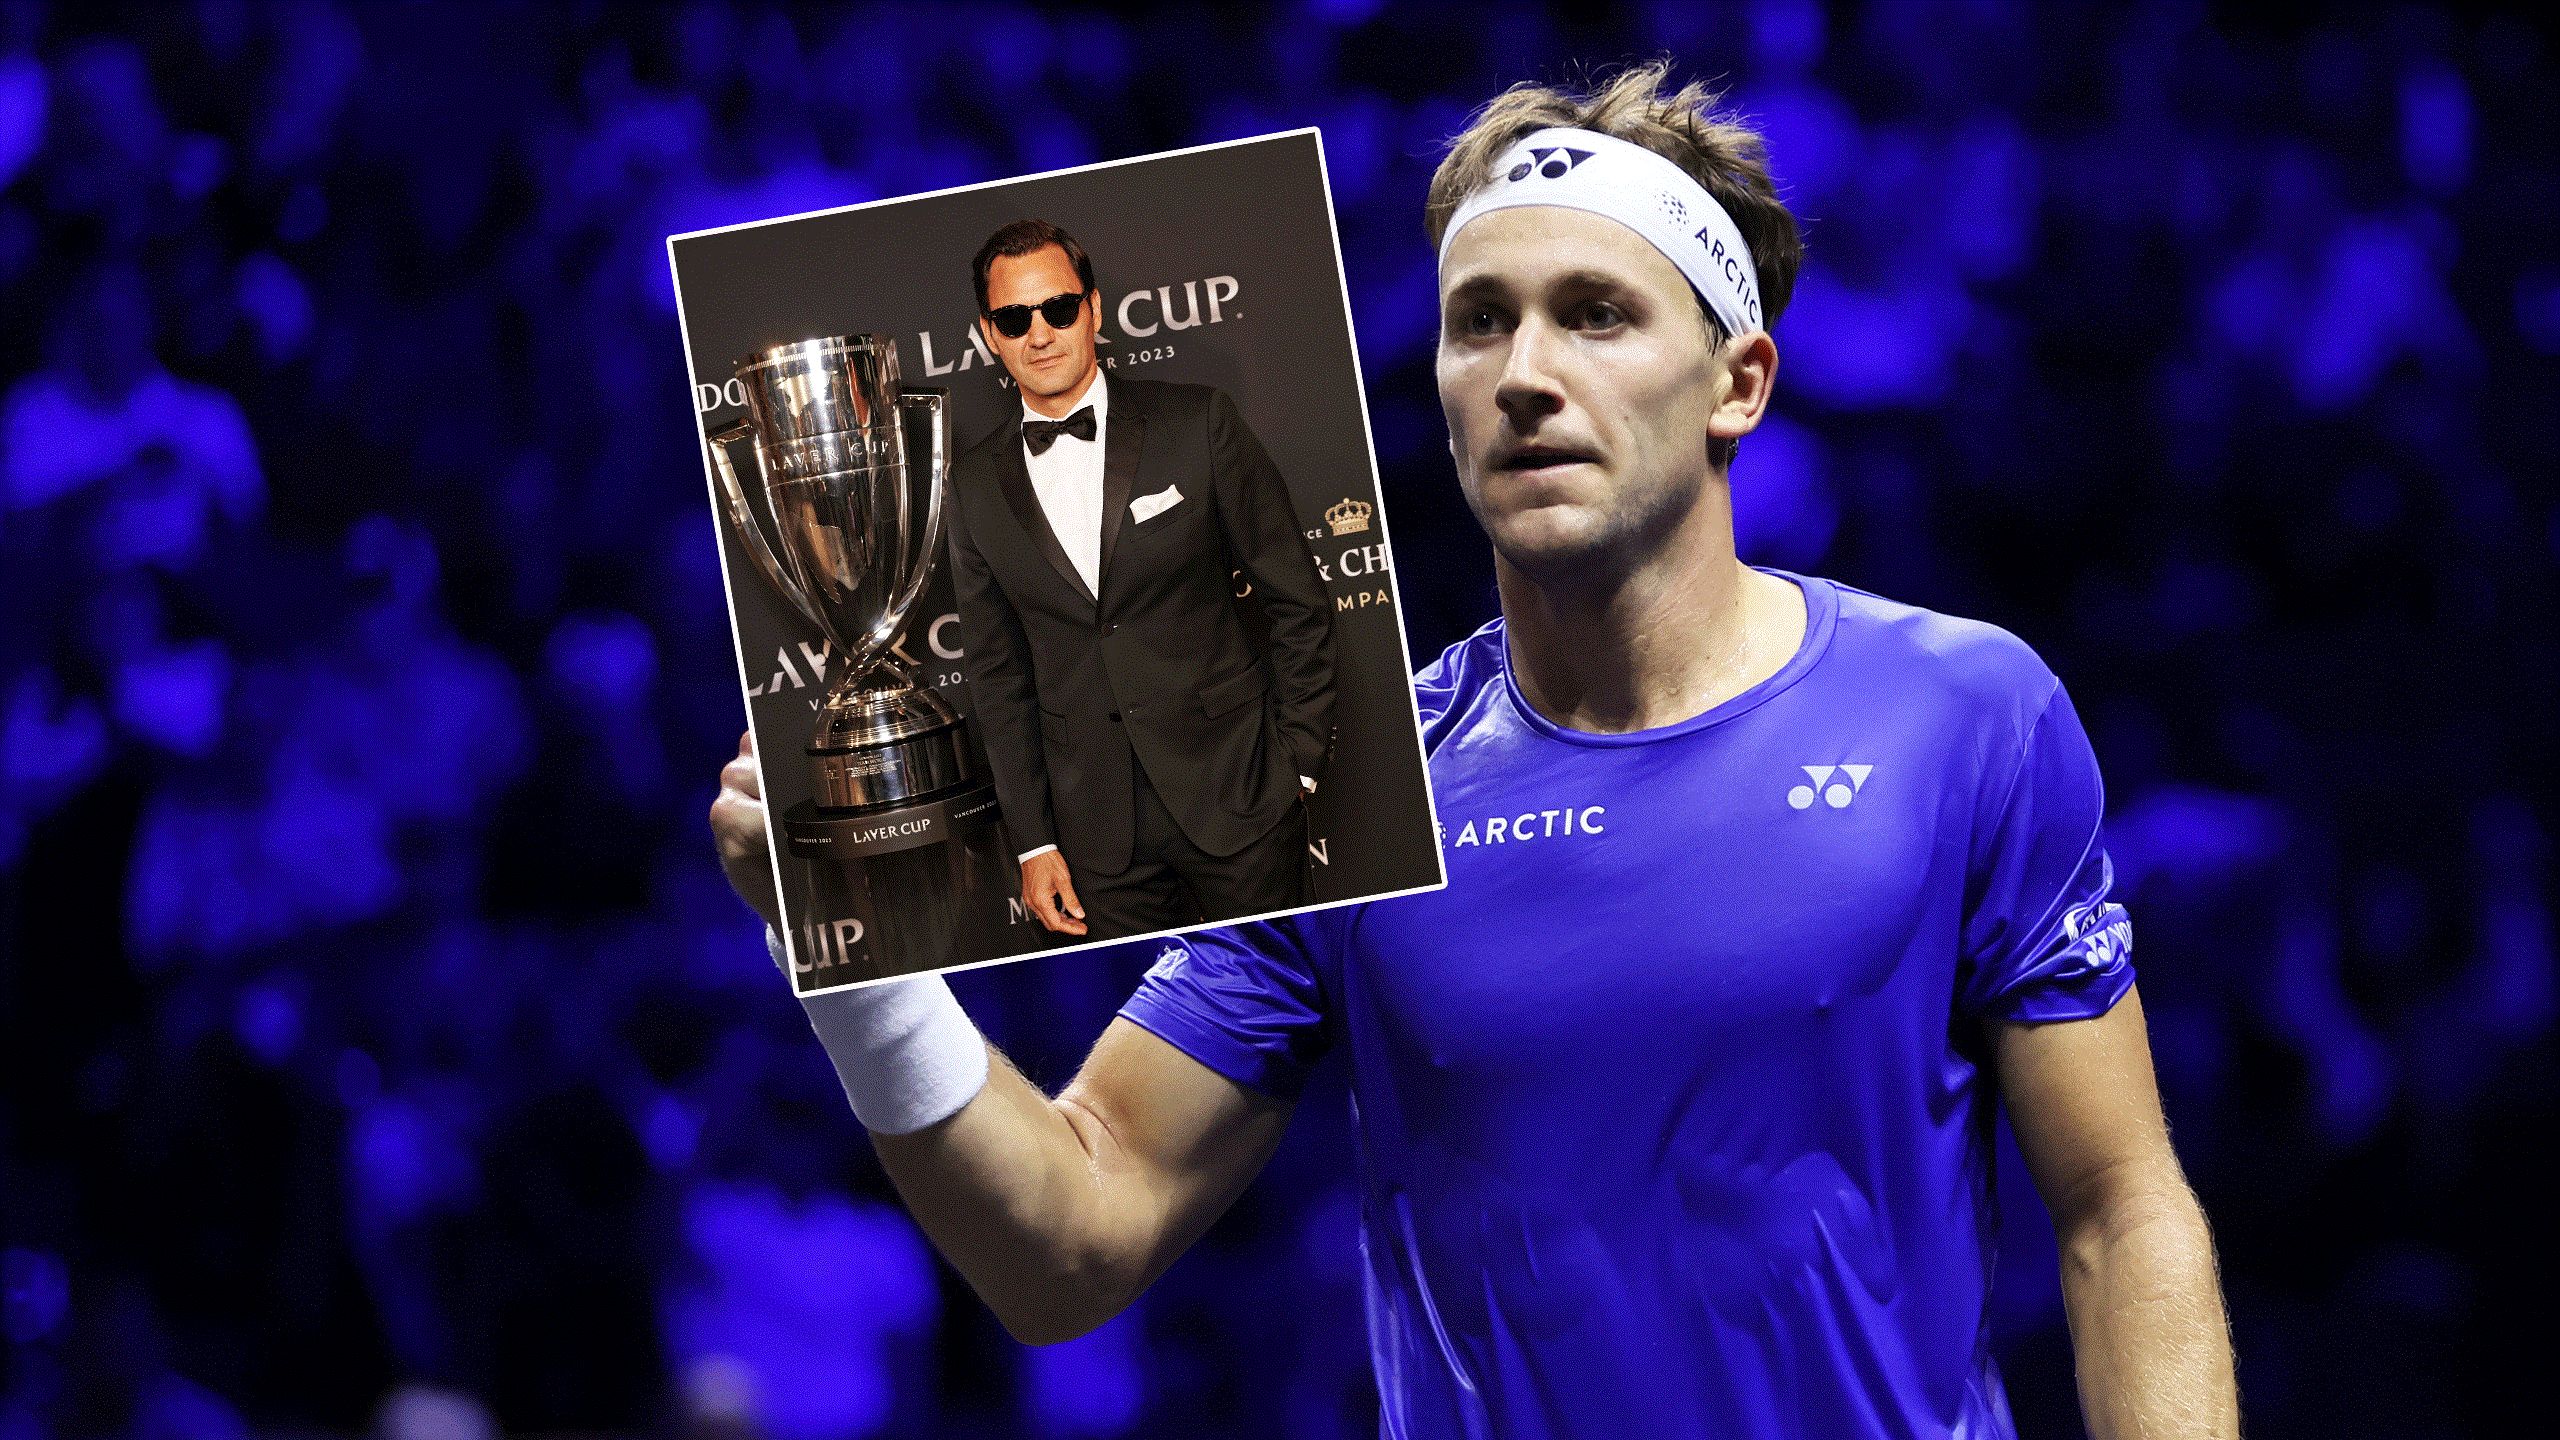 Laver Cup 2023 I know Roger is watching - Casper Ruud wowed by extra special fans in Federer and Coldplay